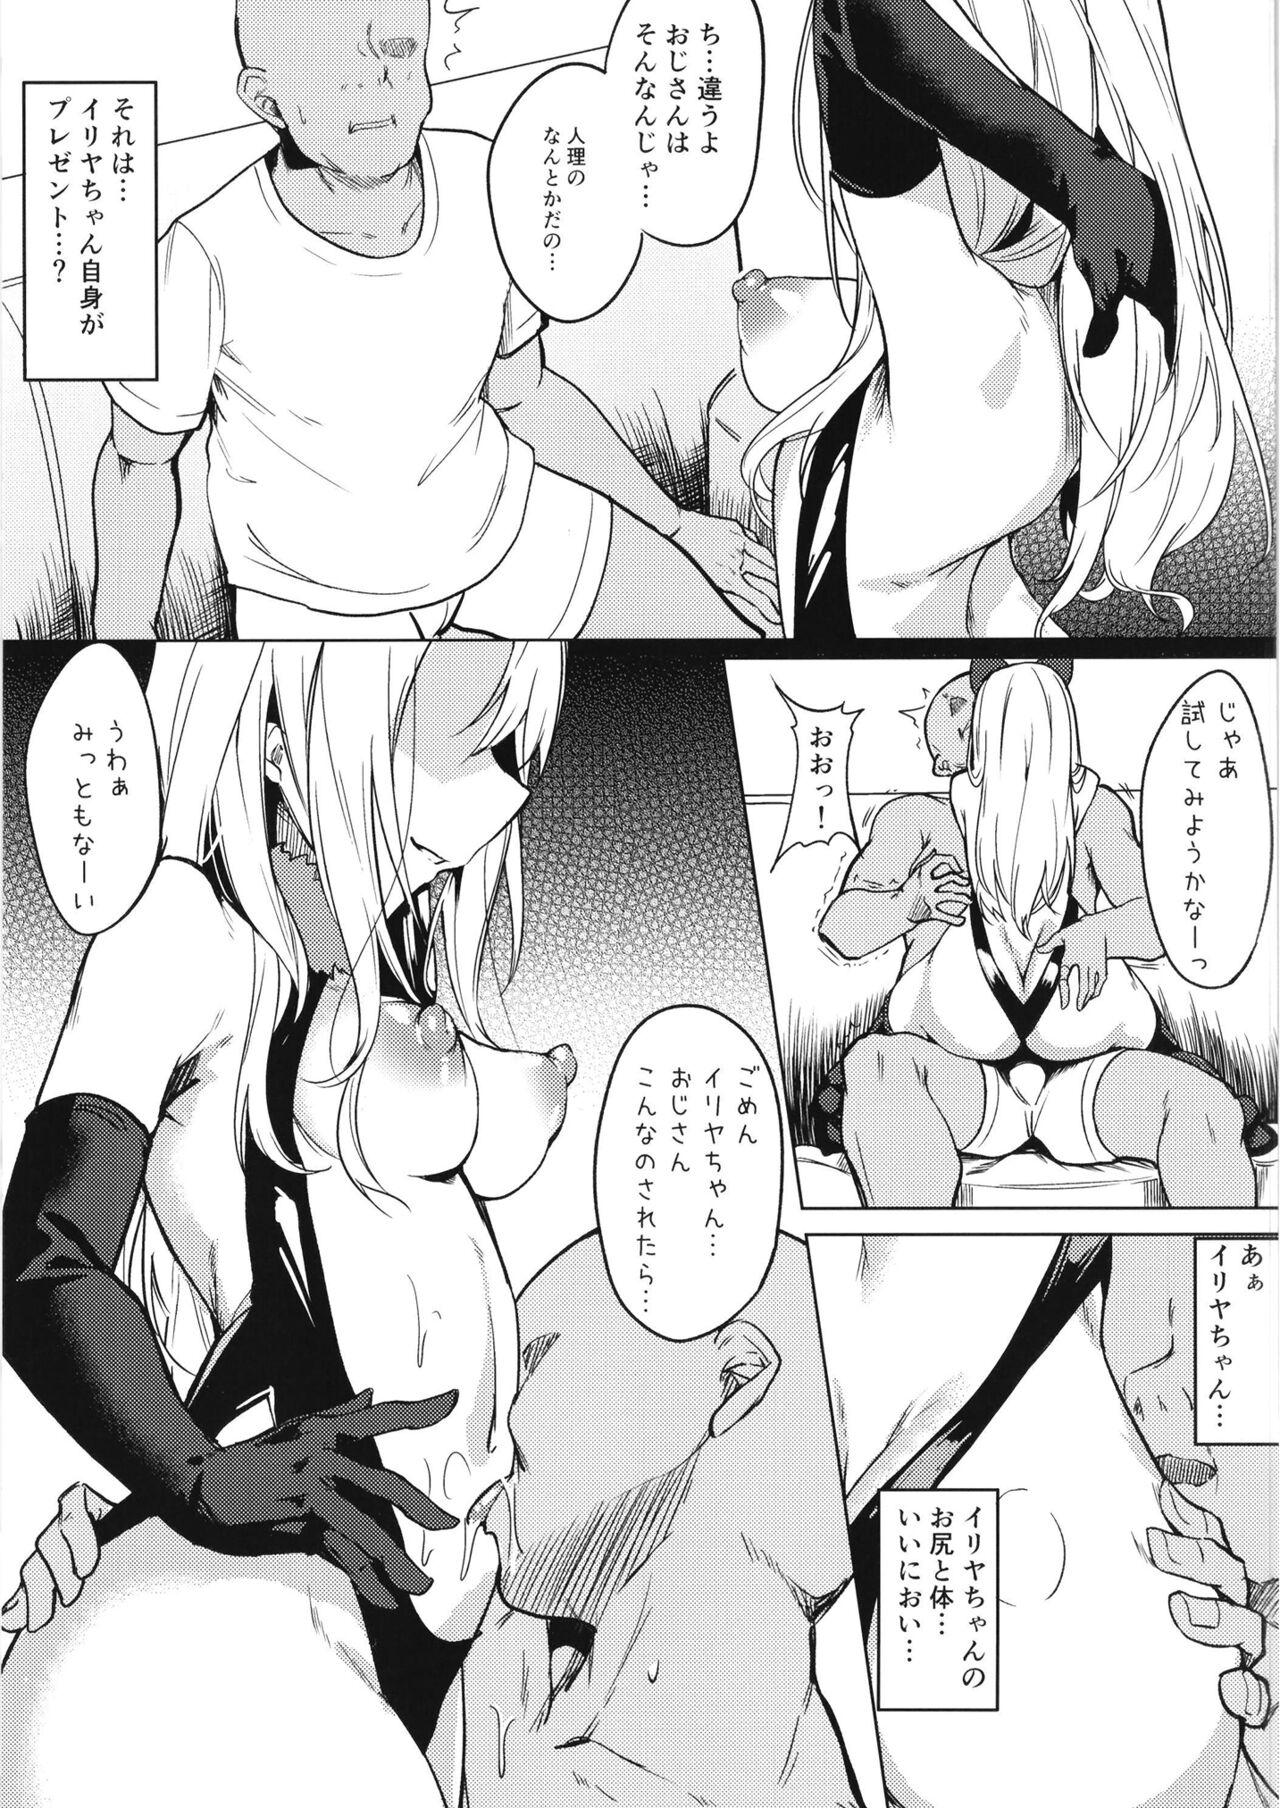 Dykes Mesugaki Bitch na Illya-chan to Asobo - Fate kaleid liner prisma illya Officesex - Page 5